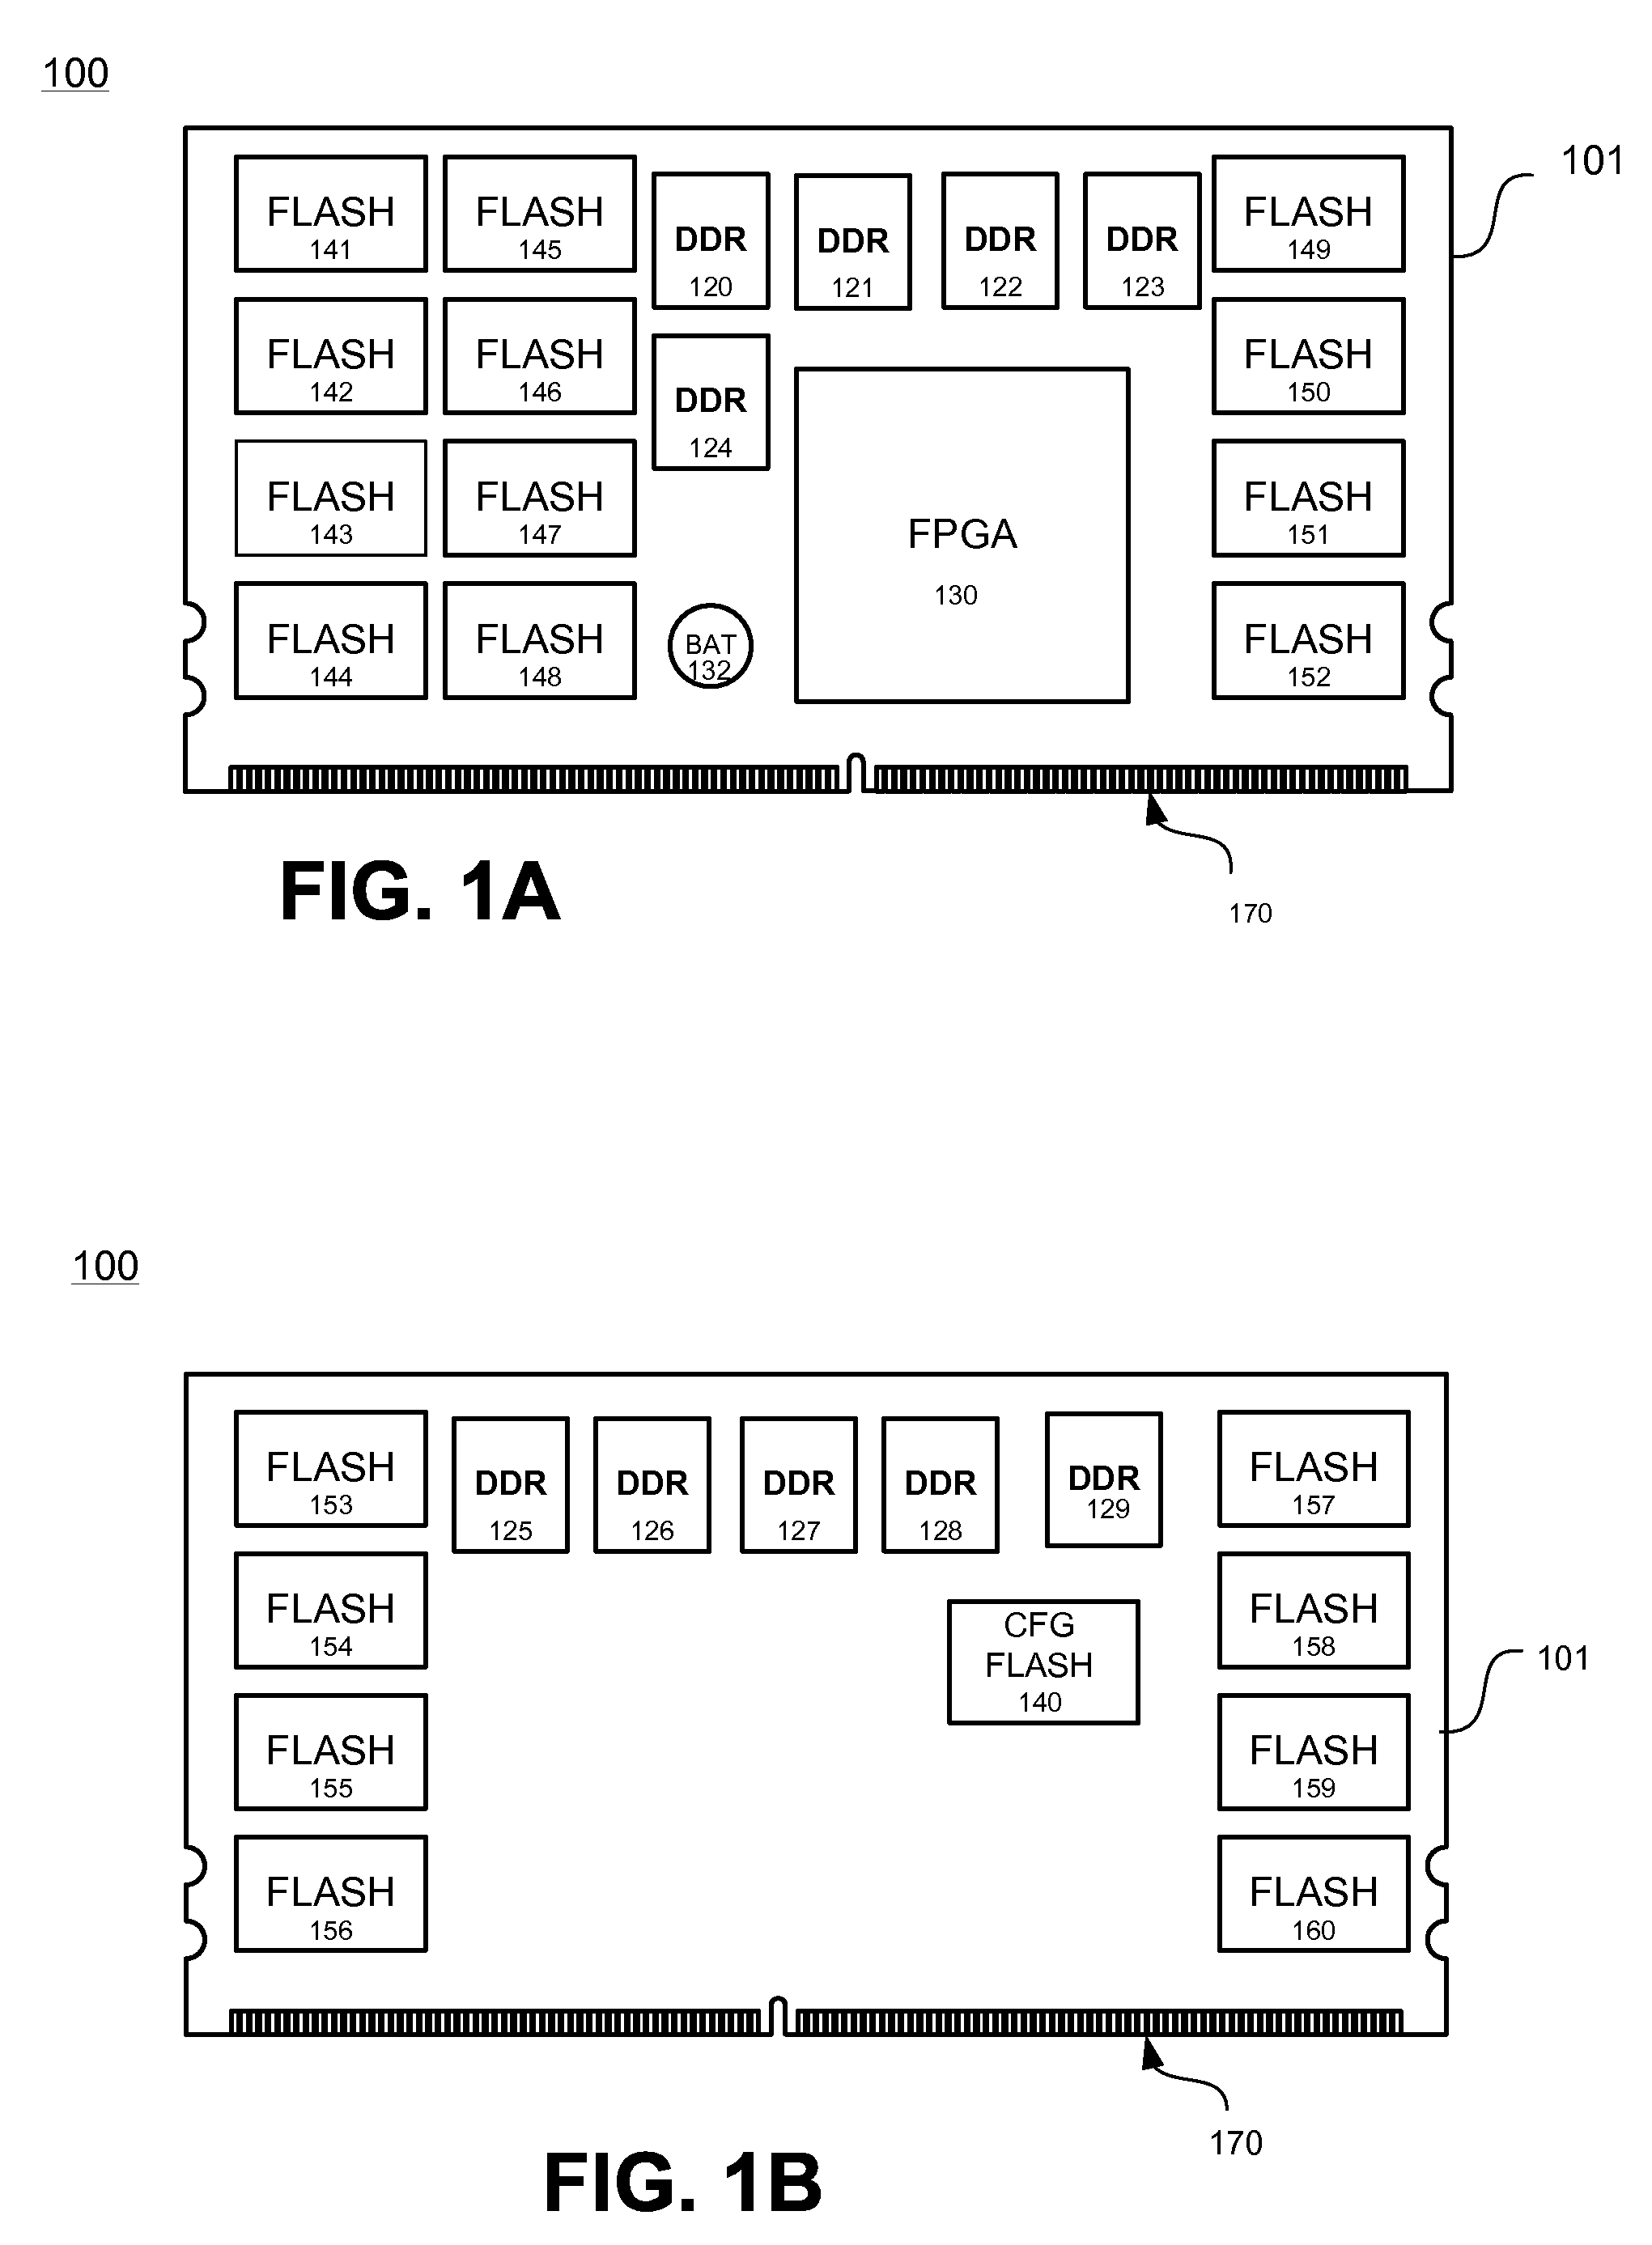 Data storage system with removable memory module having parallel channels of dram memory and flash memory